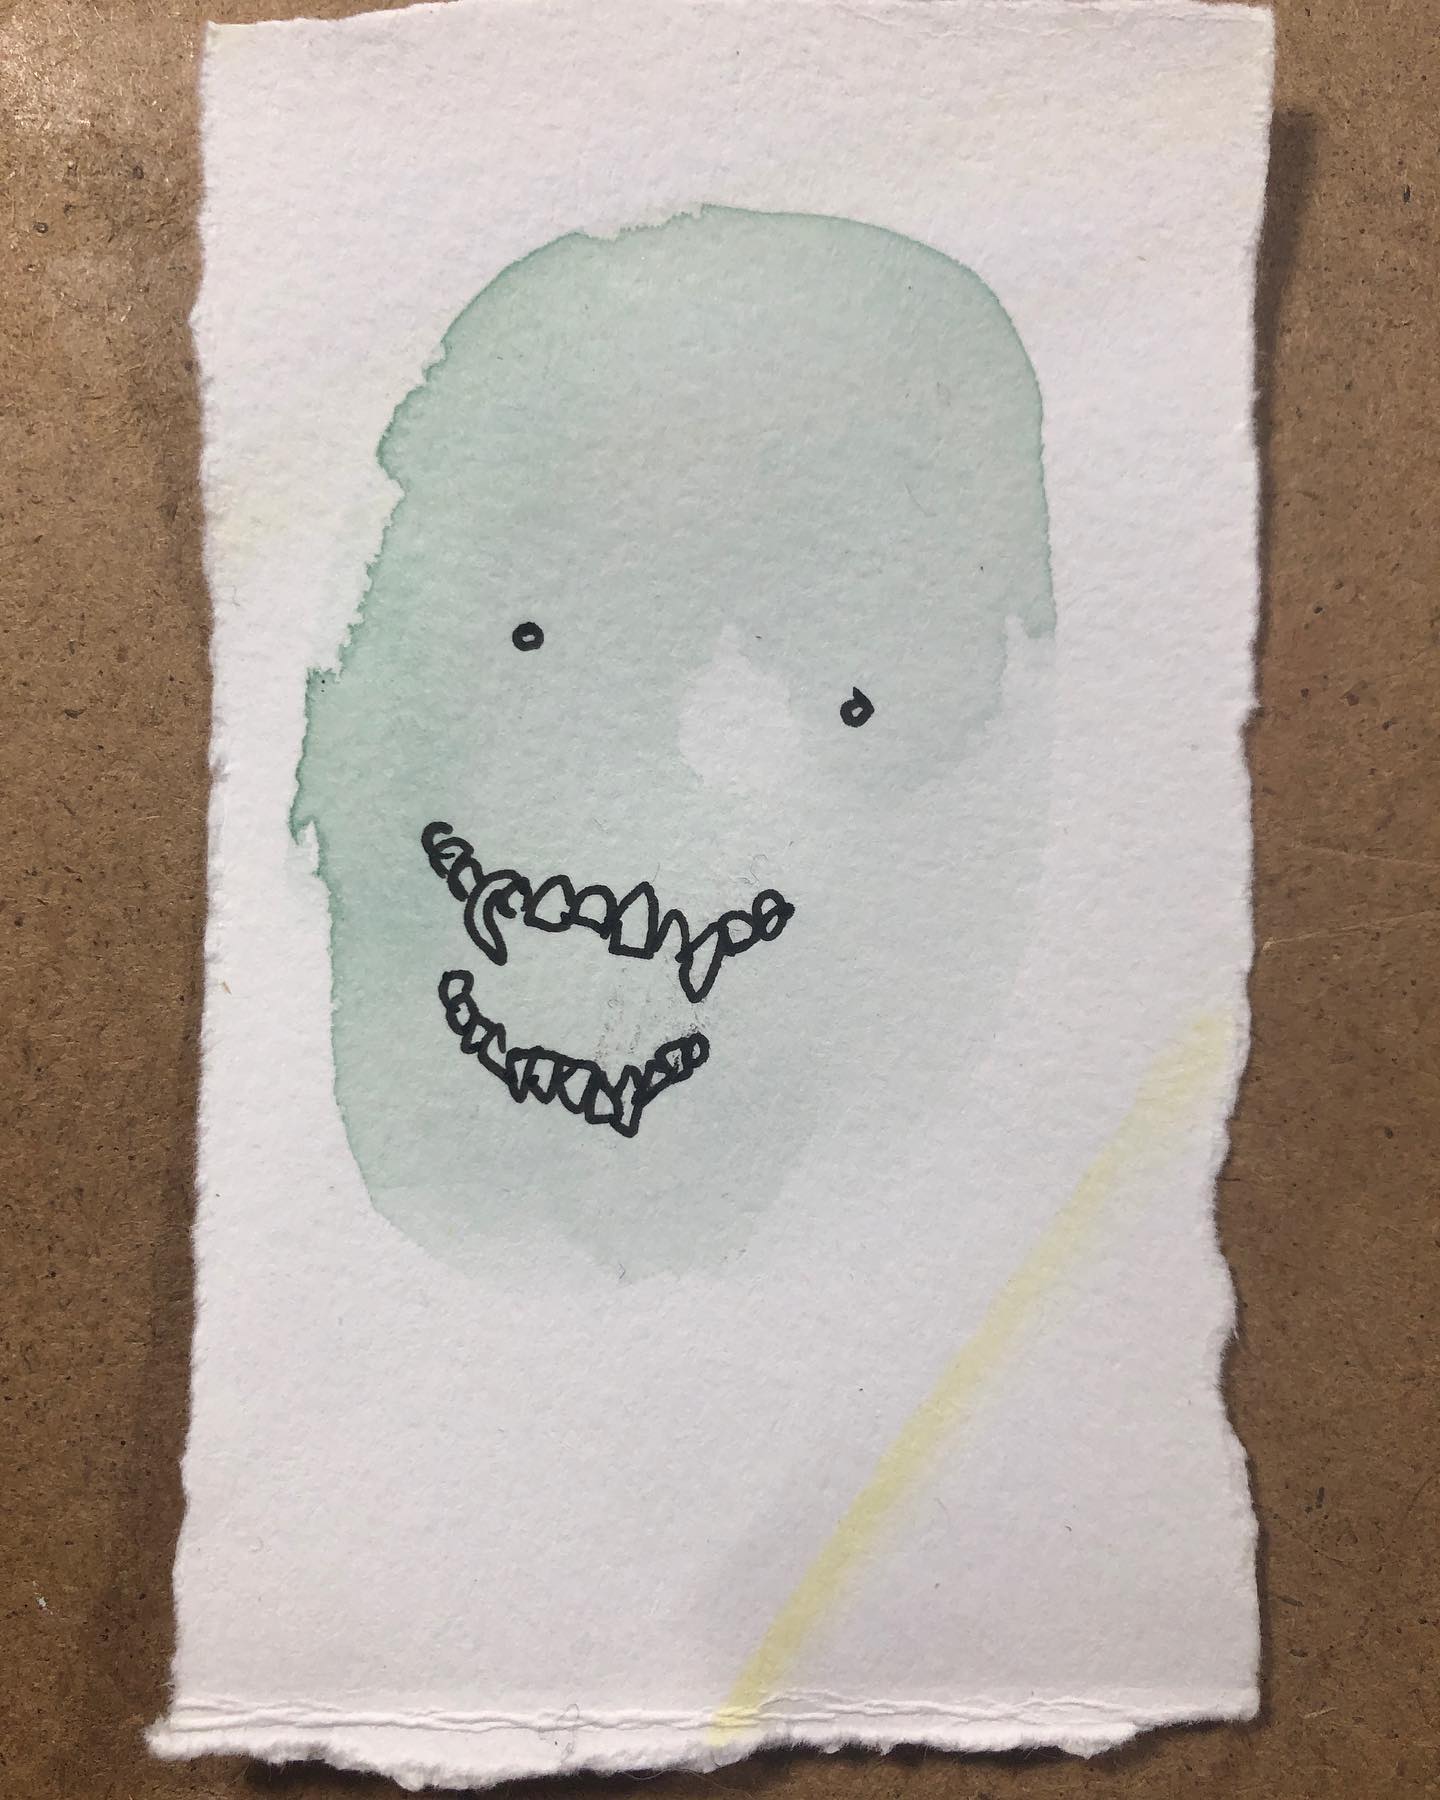 Spook drawing - green watercolor head with ink eyes and teeth